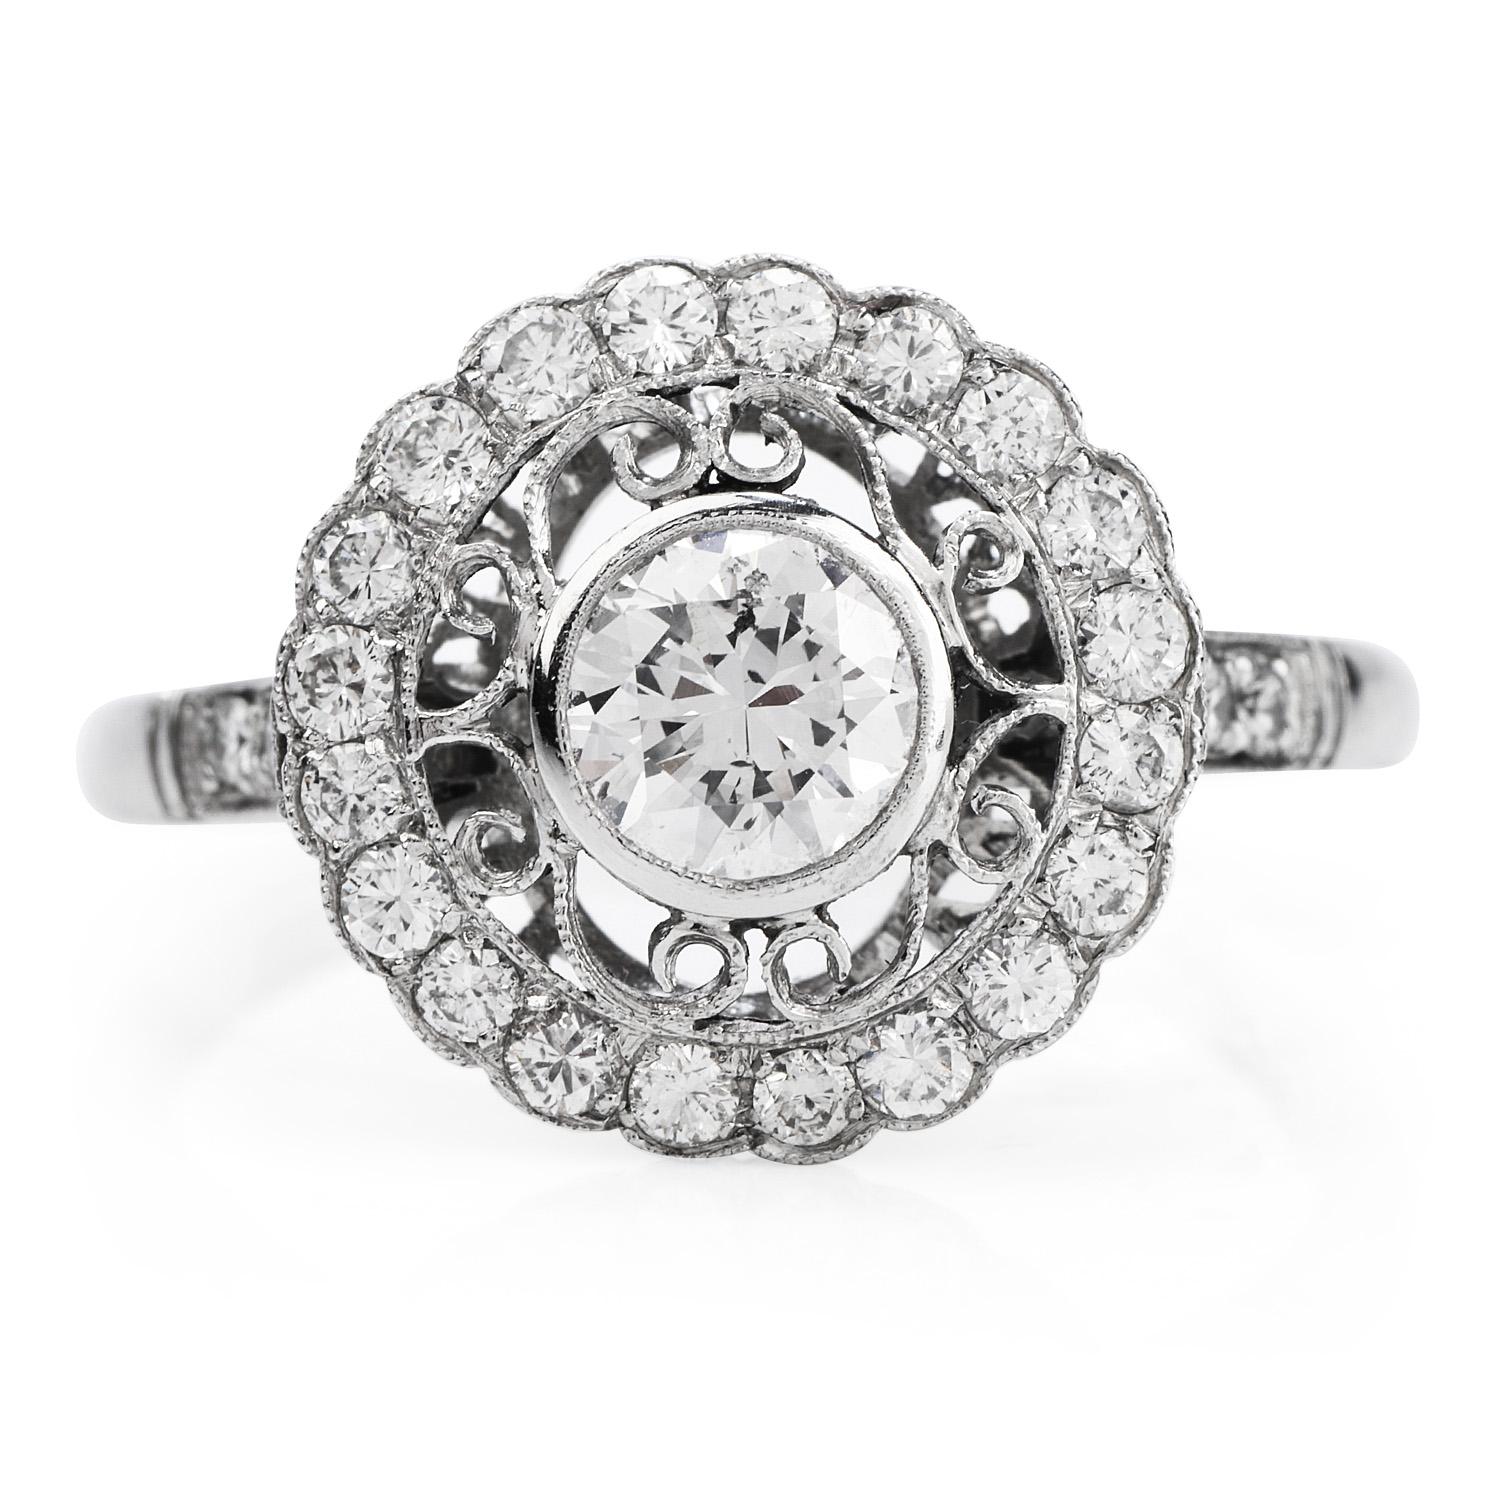 This  art deco  style romantic Diamond Platinum Round Cut Engagement ring will shine brightly on your left hand!  This
delightful ring is crafted in luxurious platinum and weighs approximately 3.5 grams and has an 13-millimeter spread on